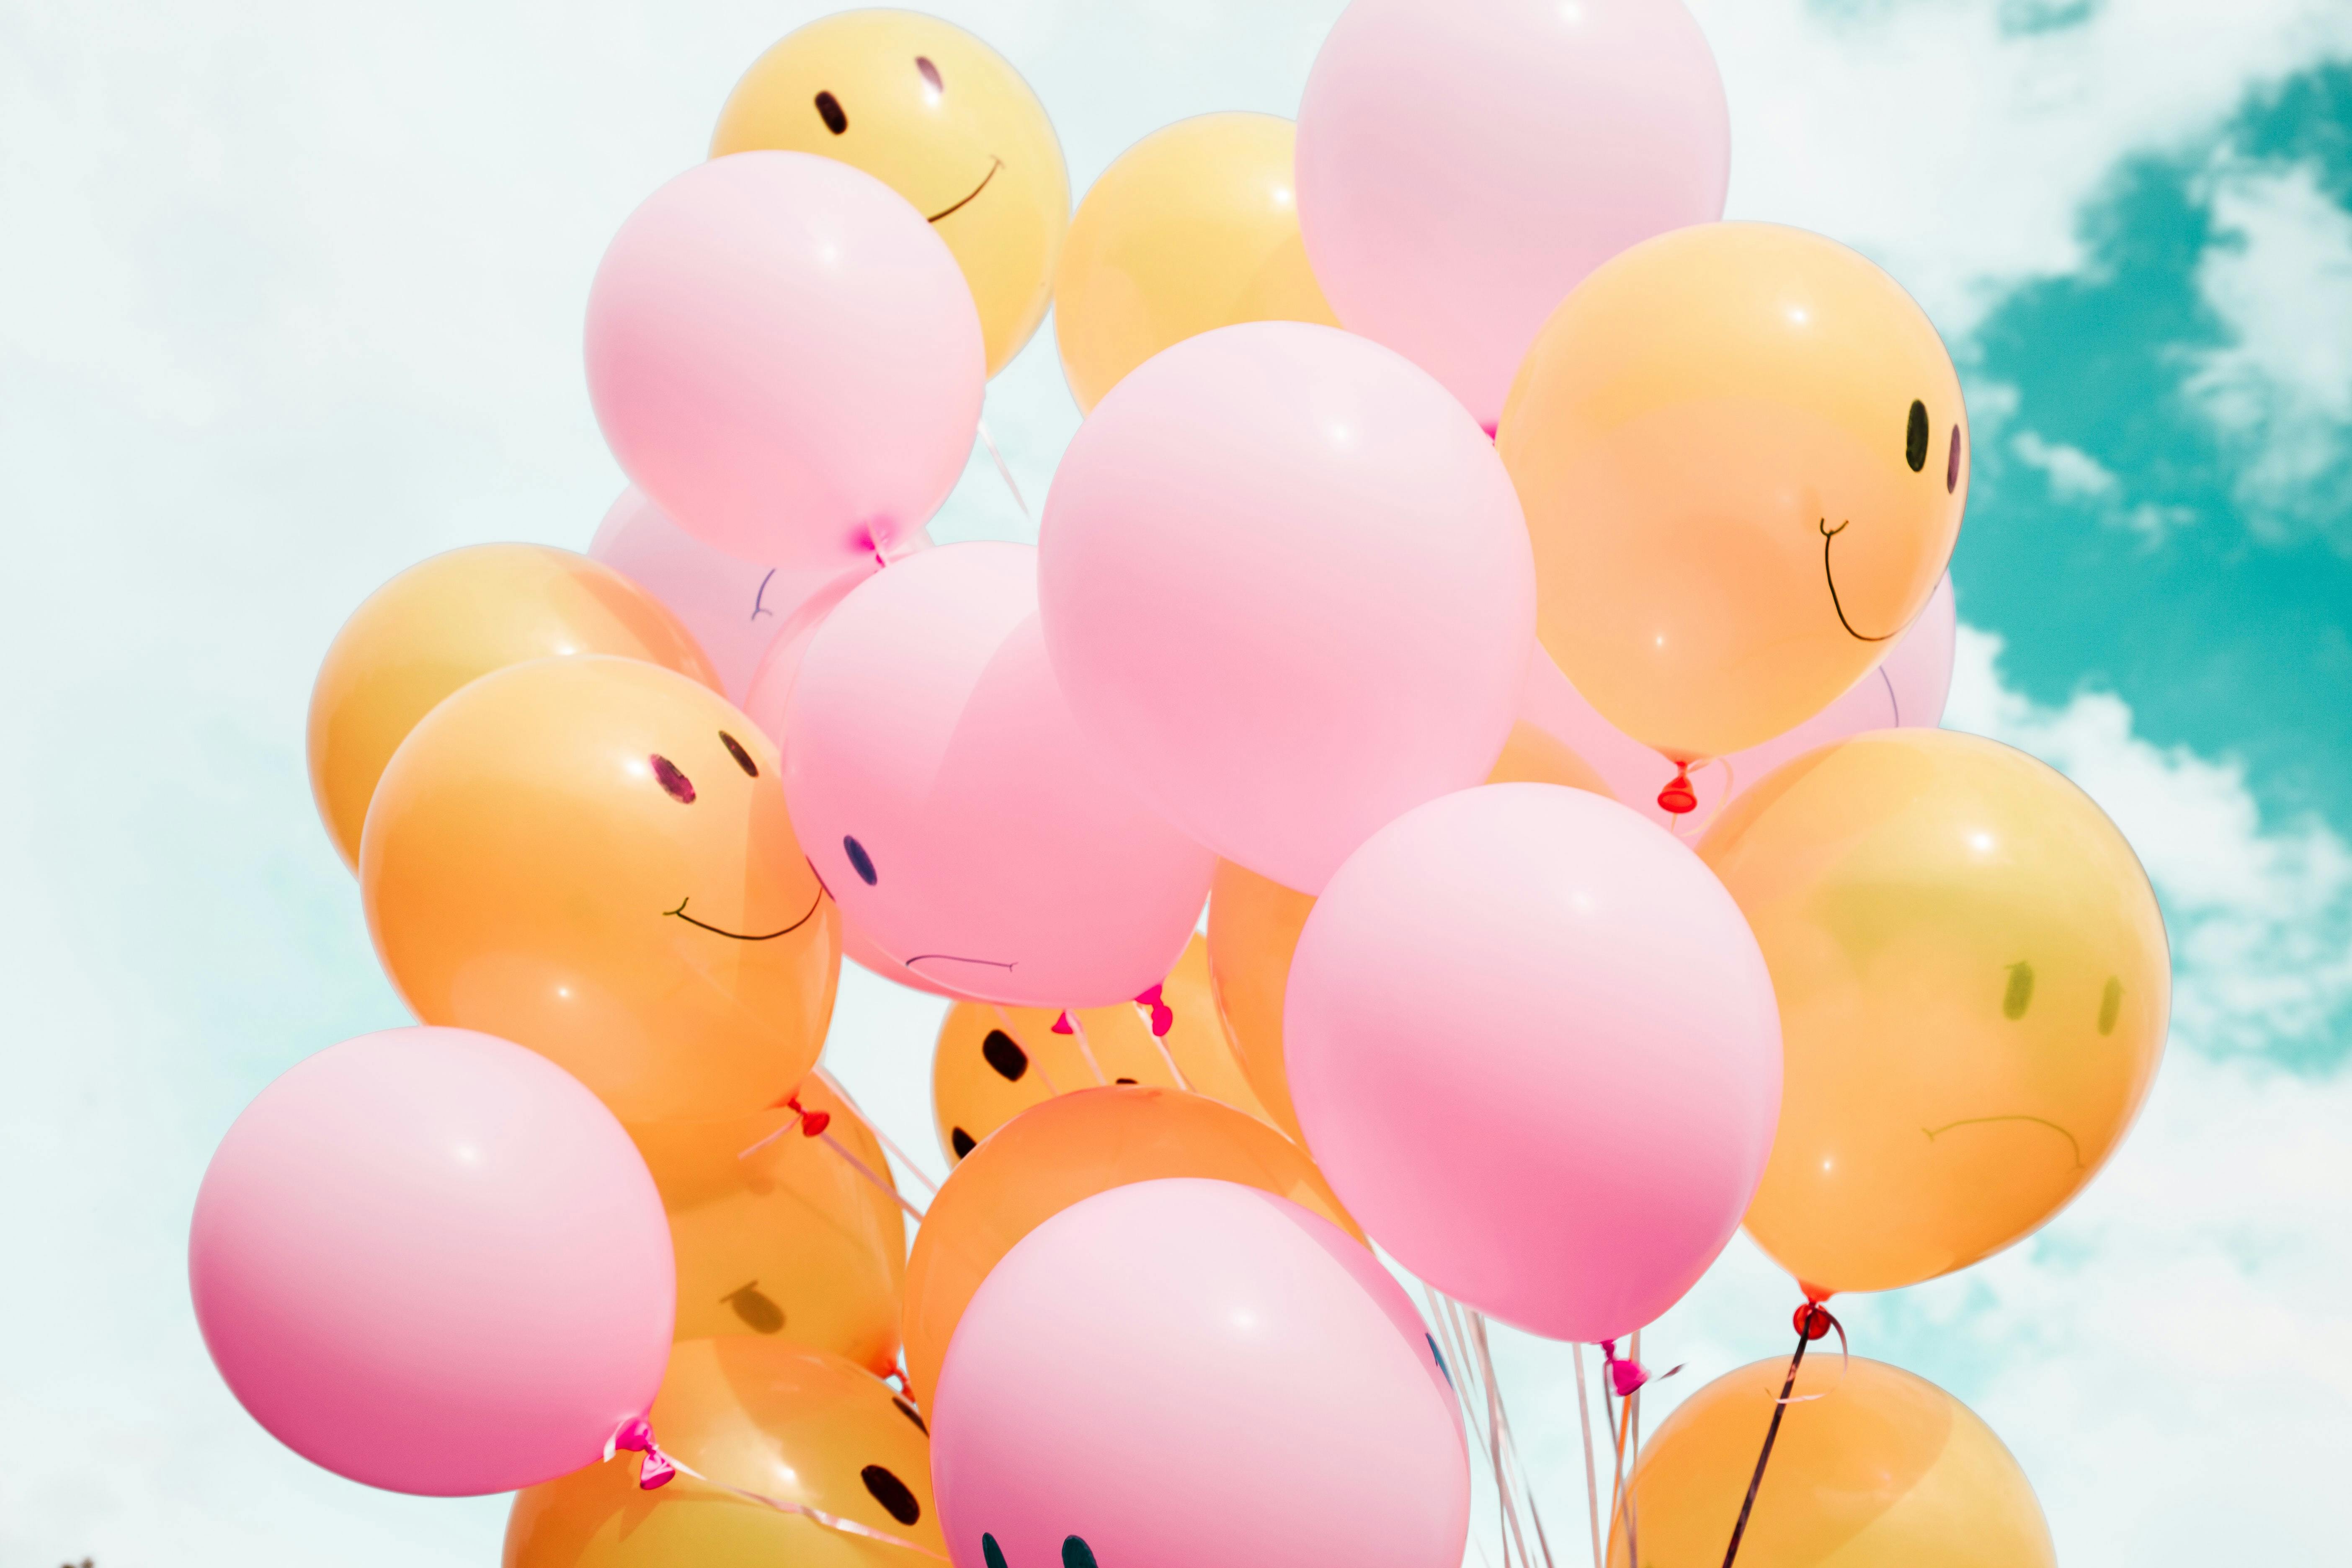 5 ways to improve your in store CX strategy - Balloons with happy faces printed on them